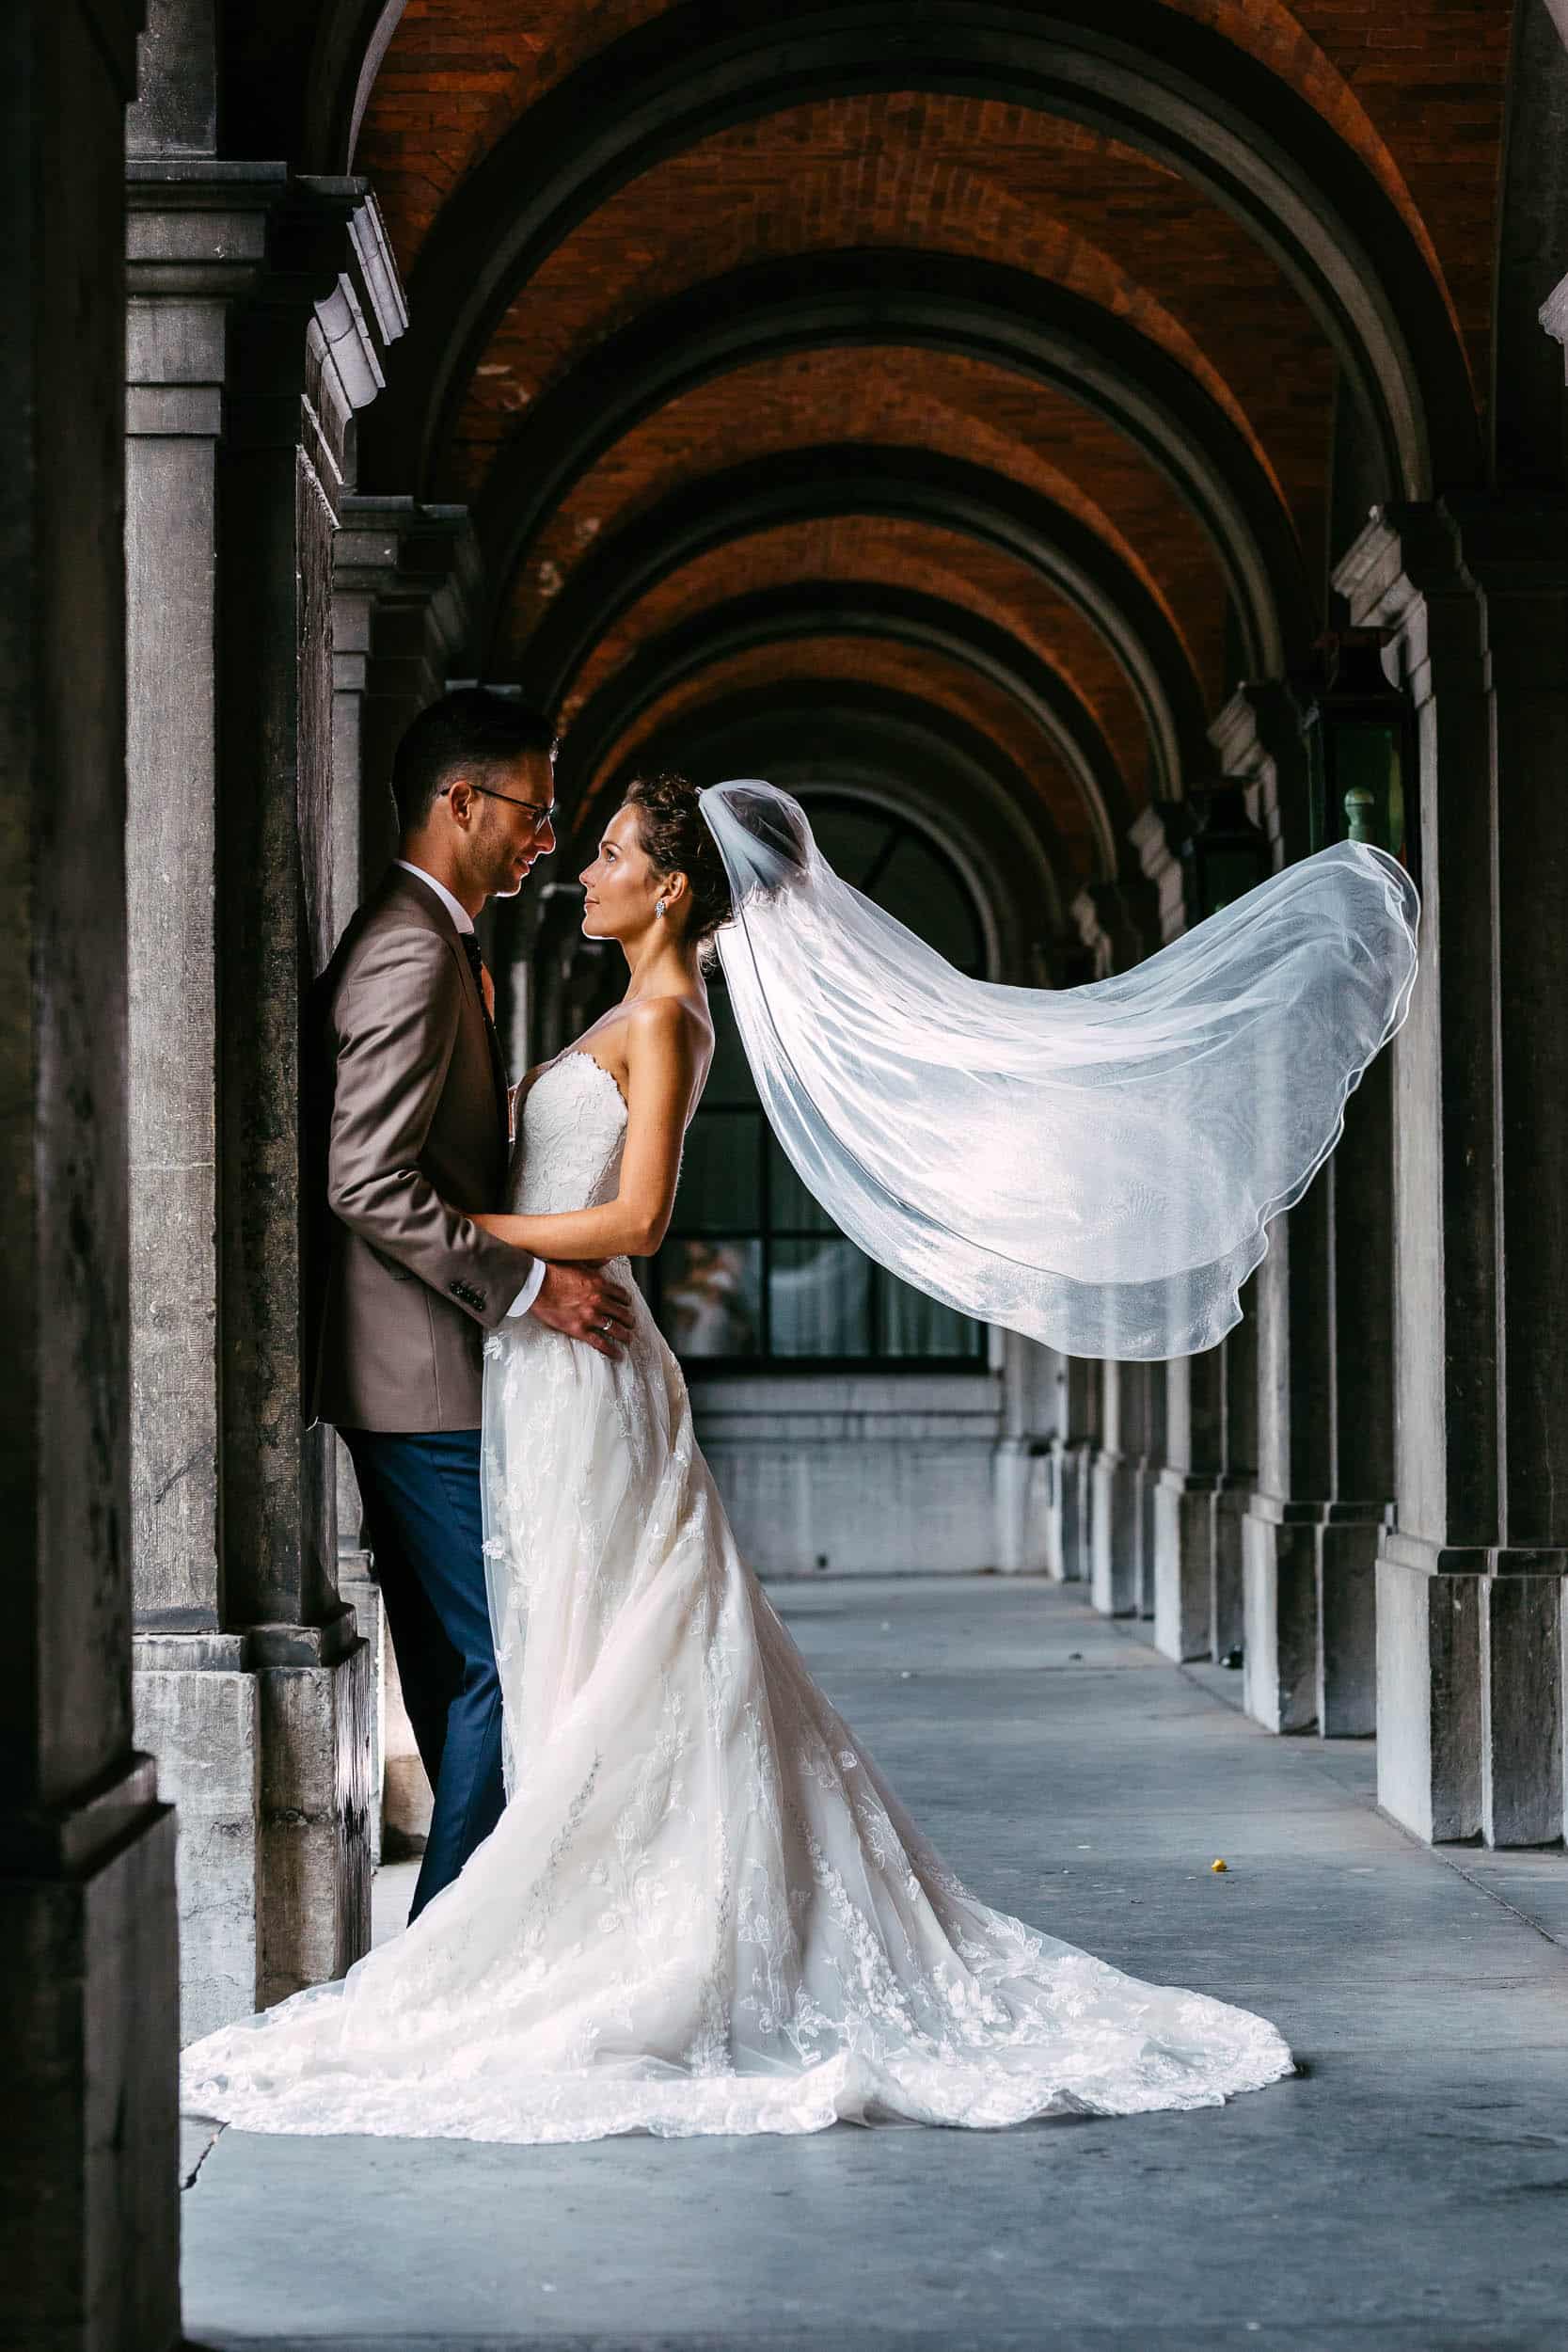 A bride and groom pose under arches in a courtyard.